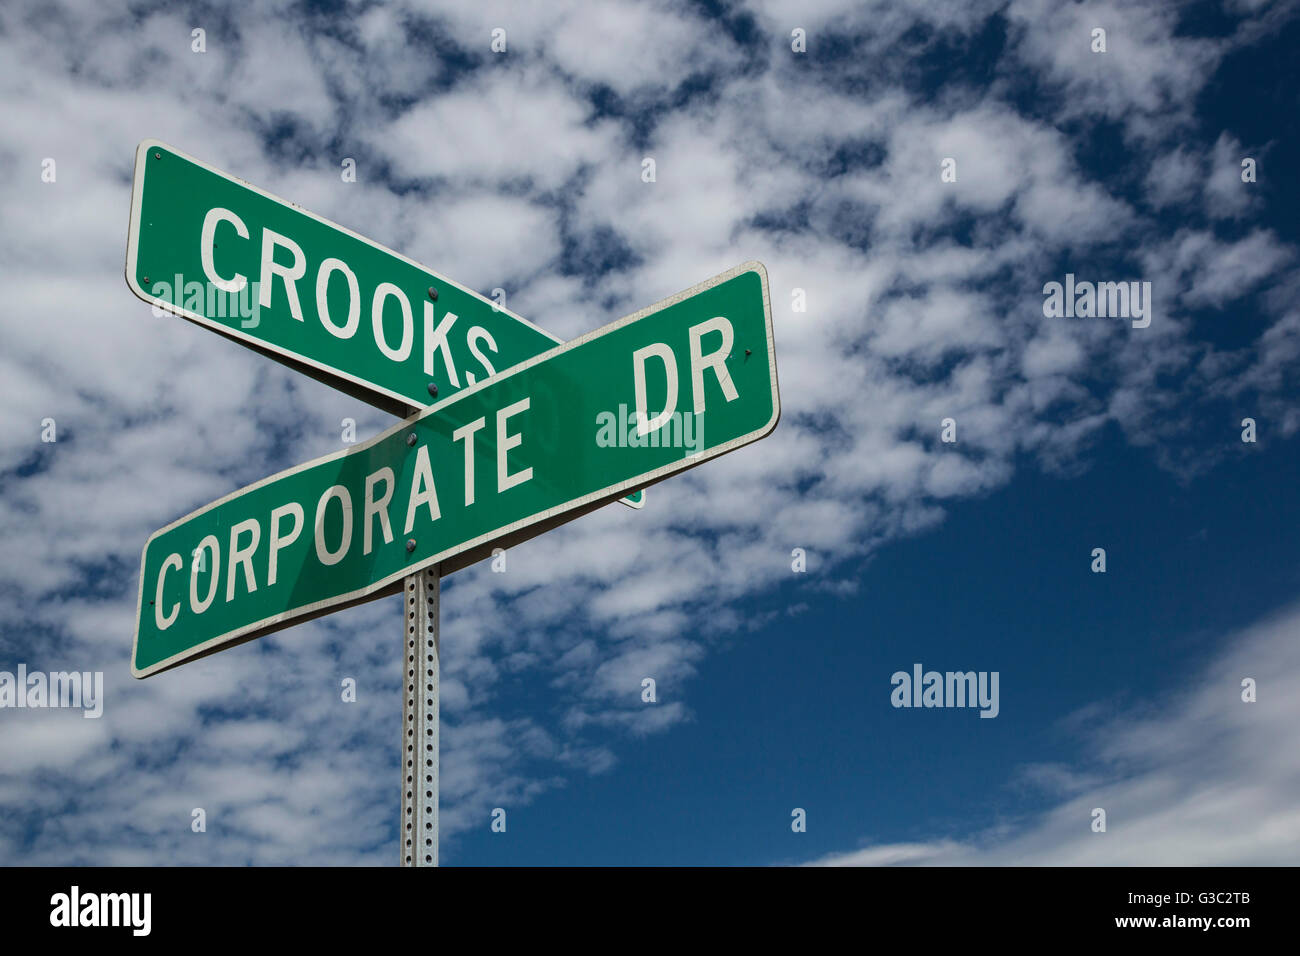 Troy, Michigan - The intersection of Crooks Road and Corporate Drive, in an area with many corporate offices. Stock Photo